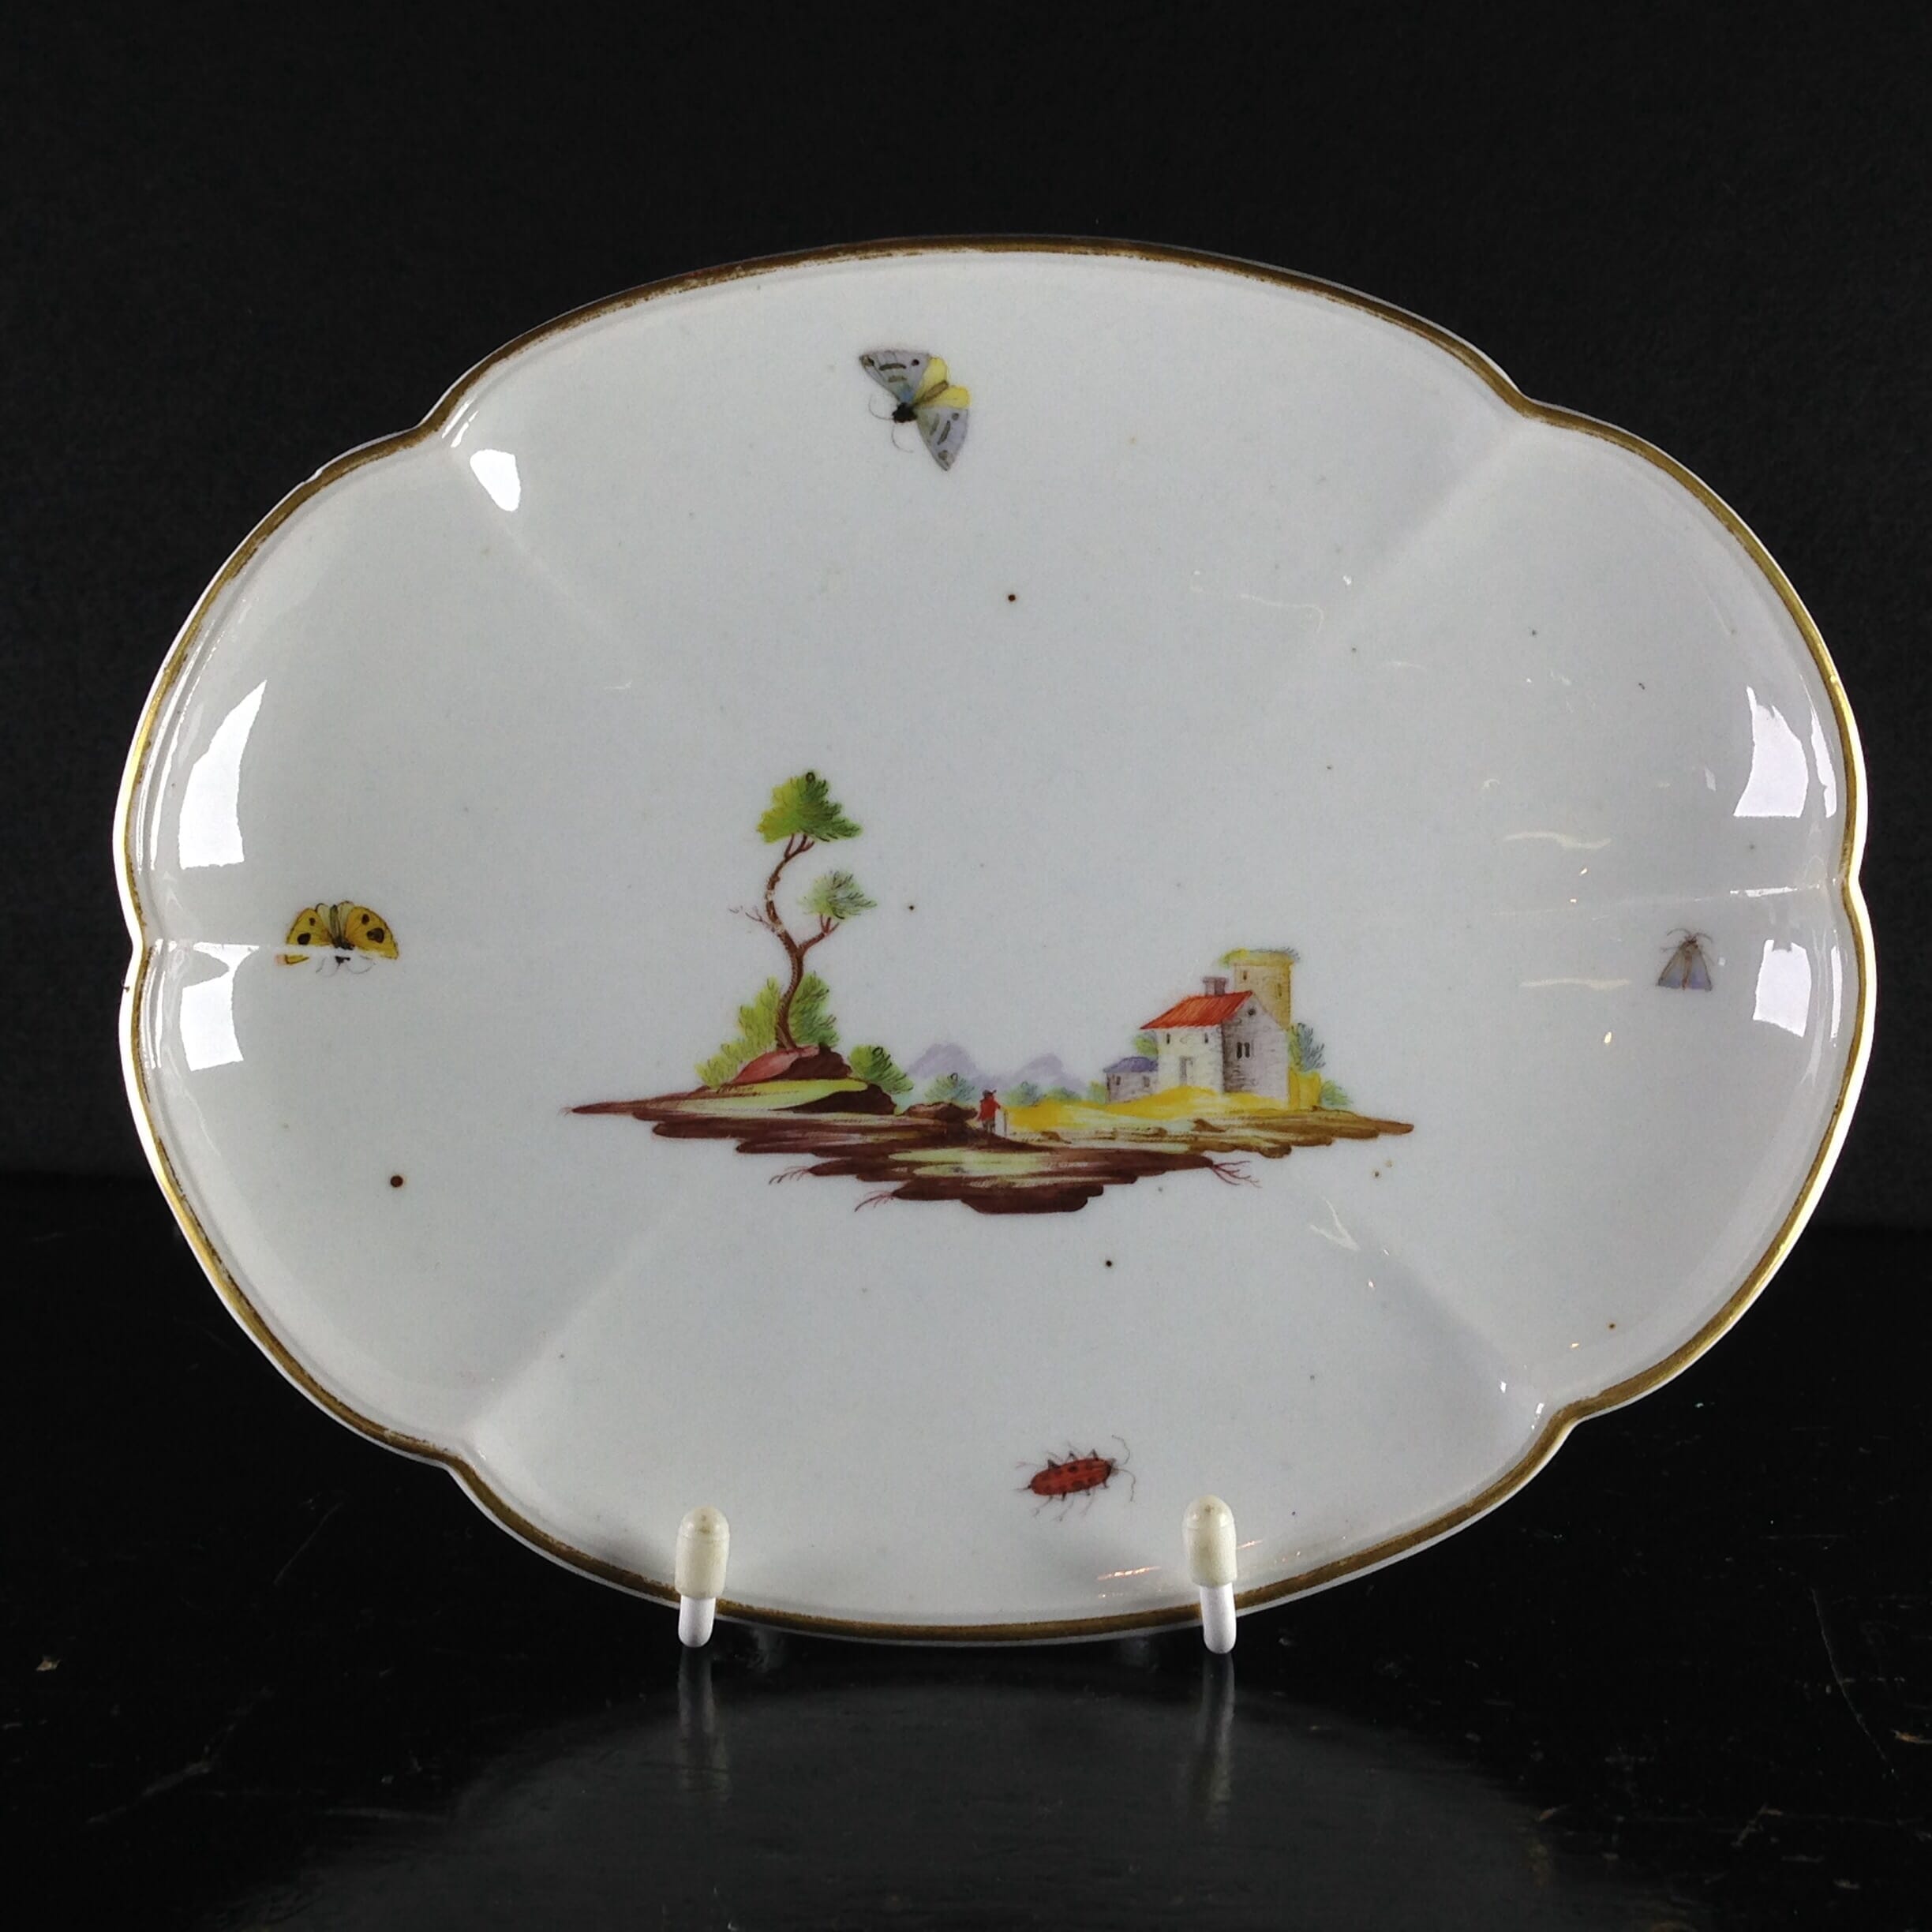 Niderville dish painted with landscape and bugs, c.1770 -0